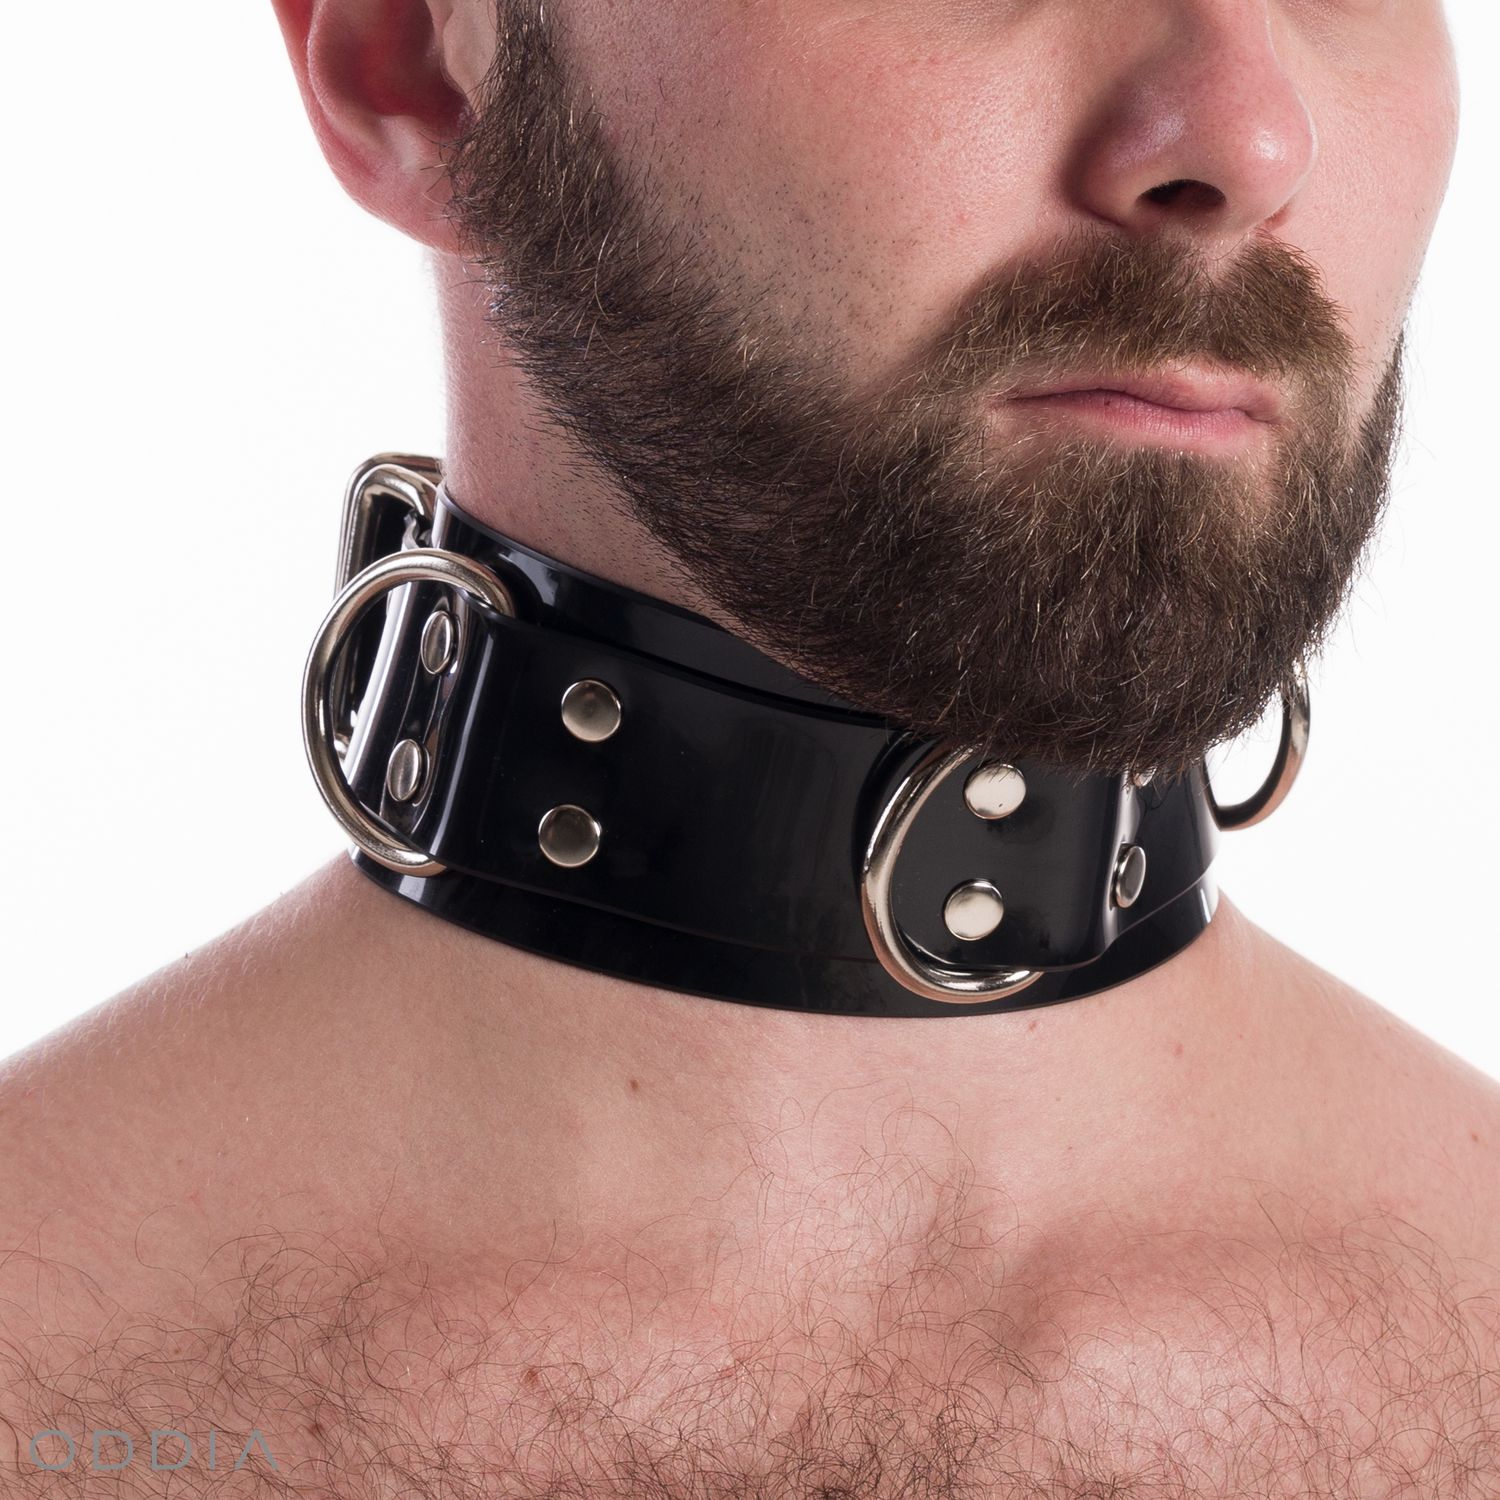 Black men's BDSM collar with rings for carabiner attachment